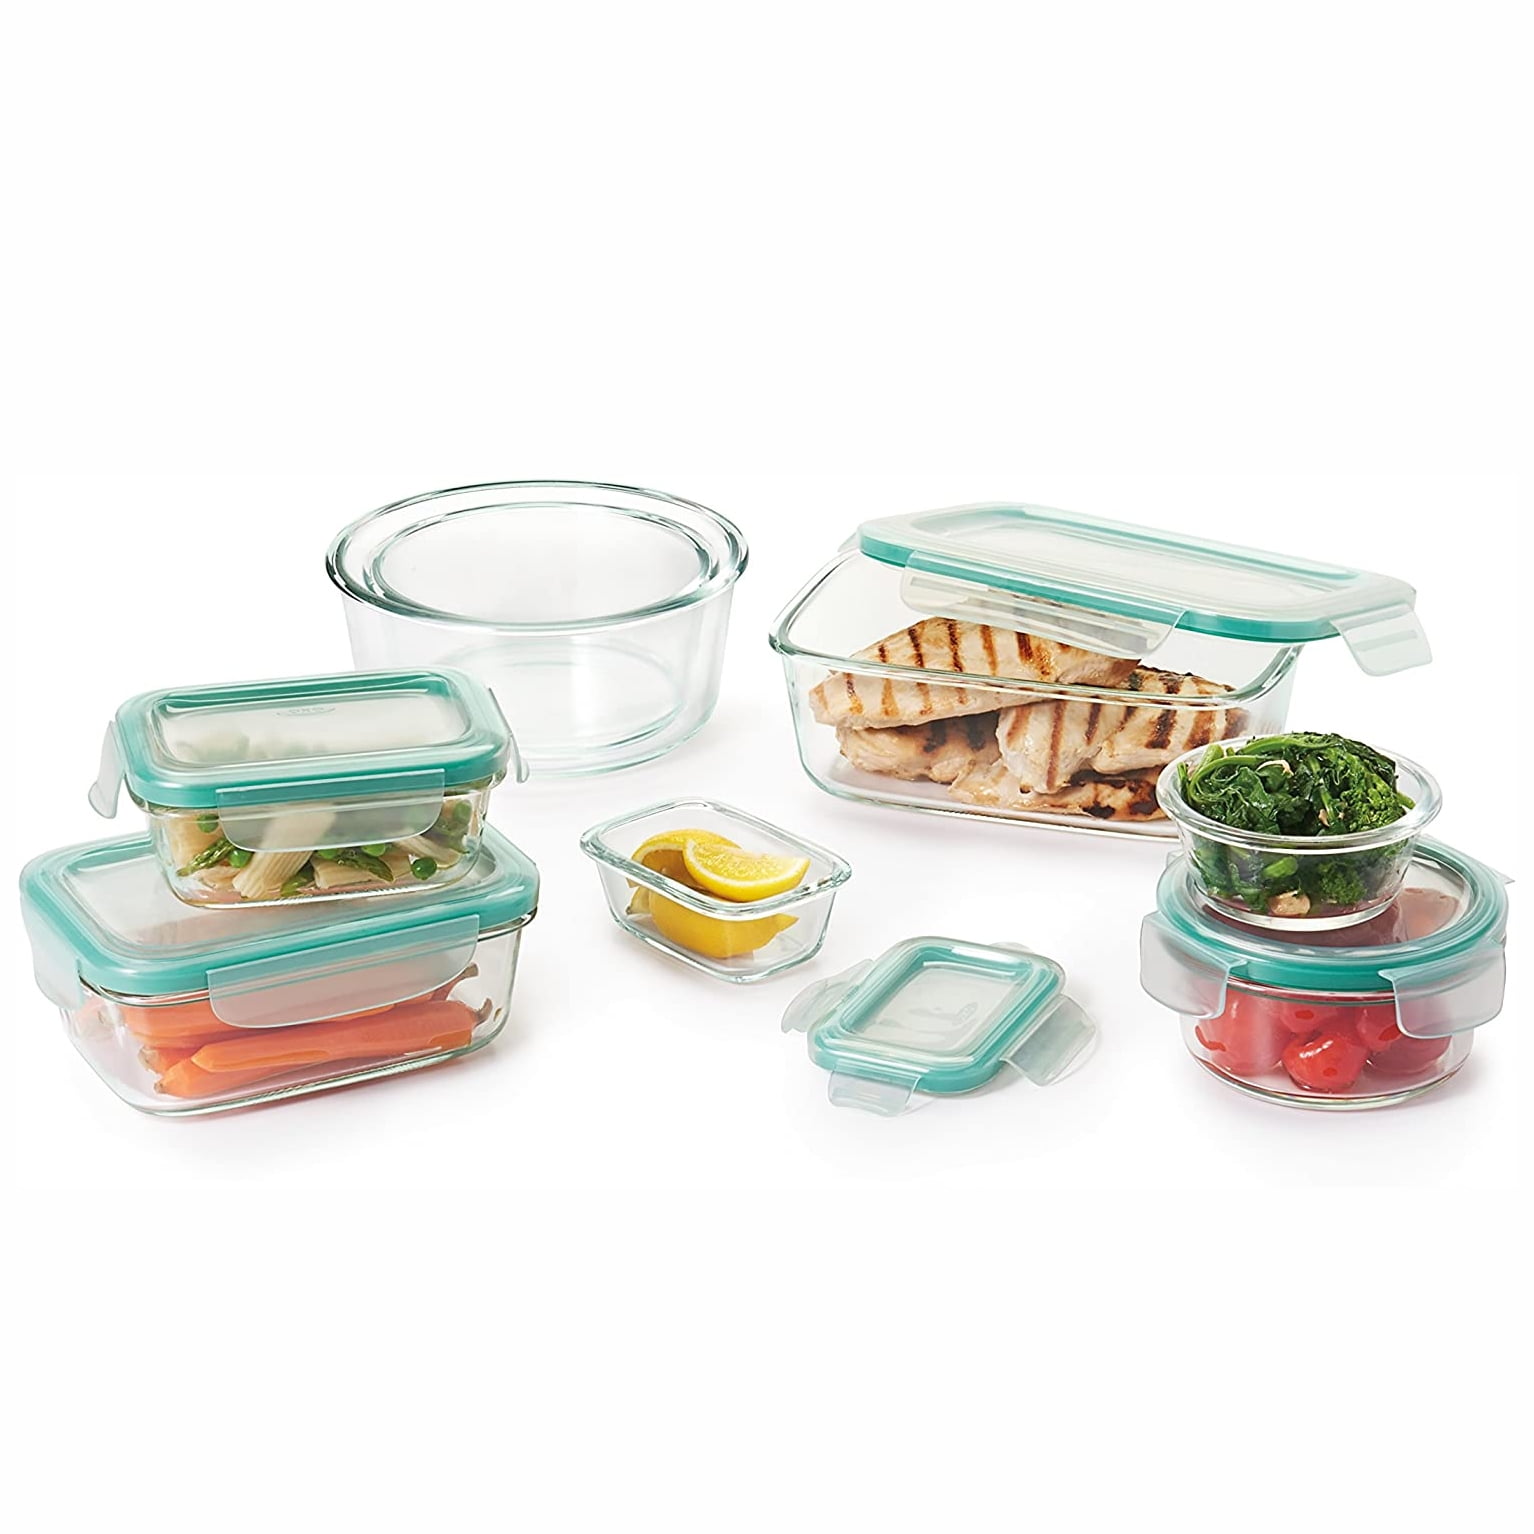 OXO Good Grips 14-Piece Glass Baking Dish Set with Lids